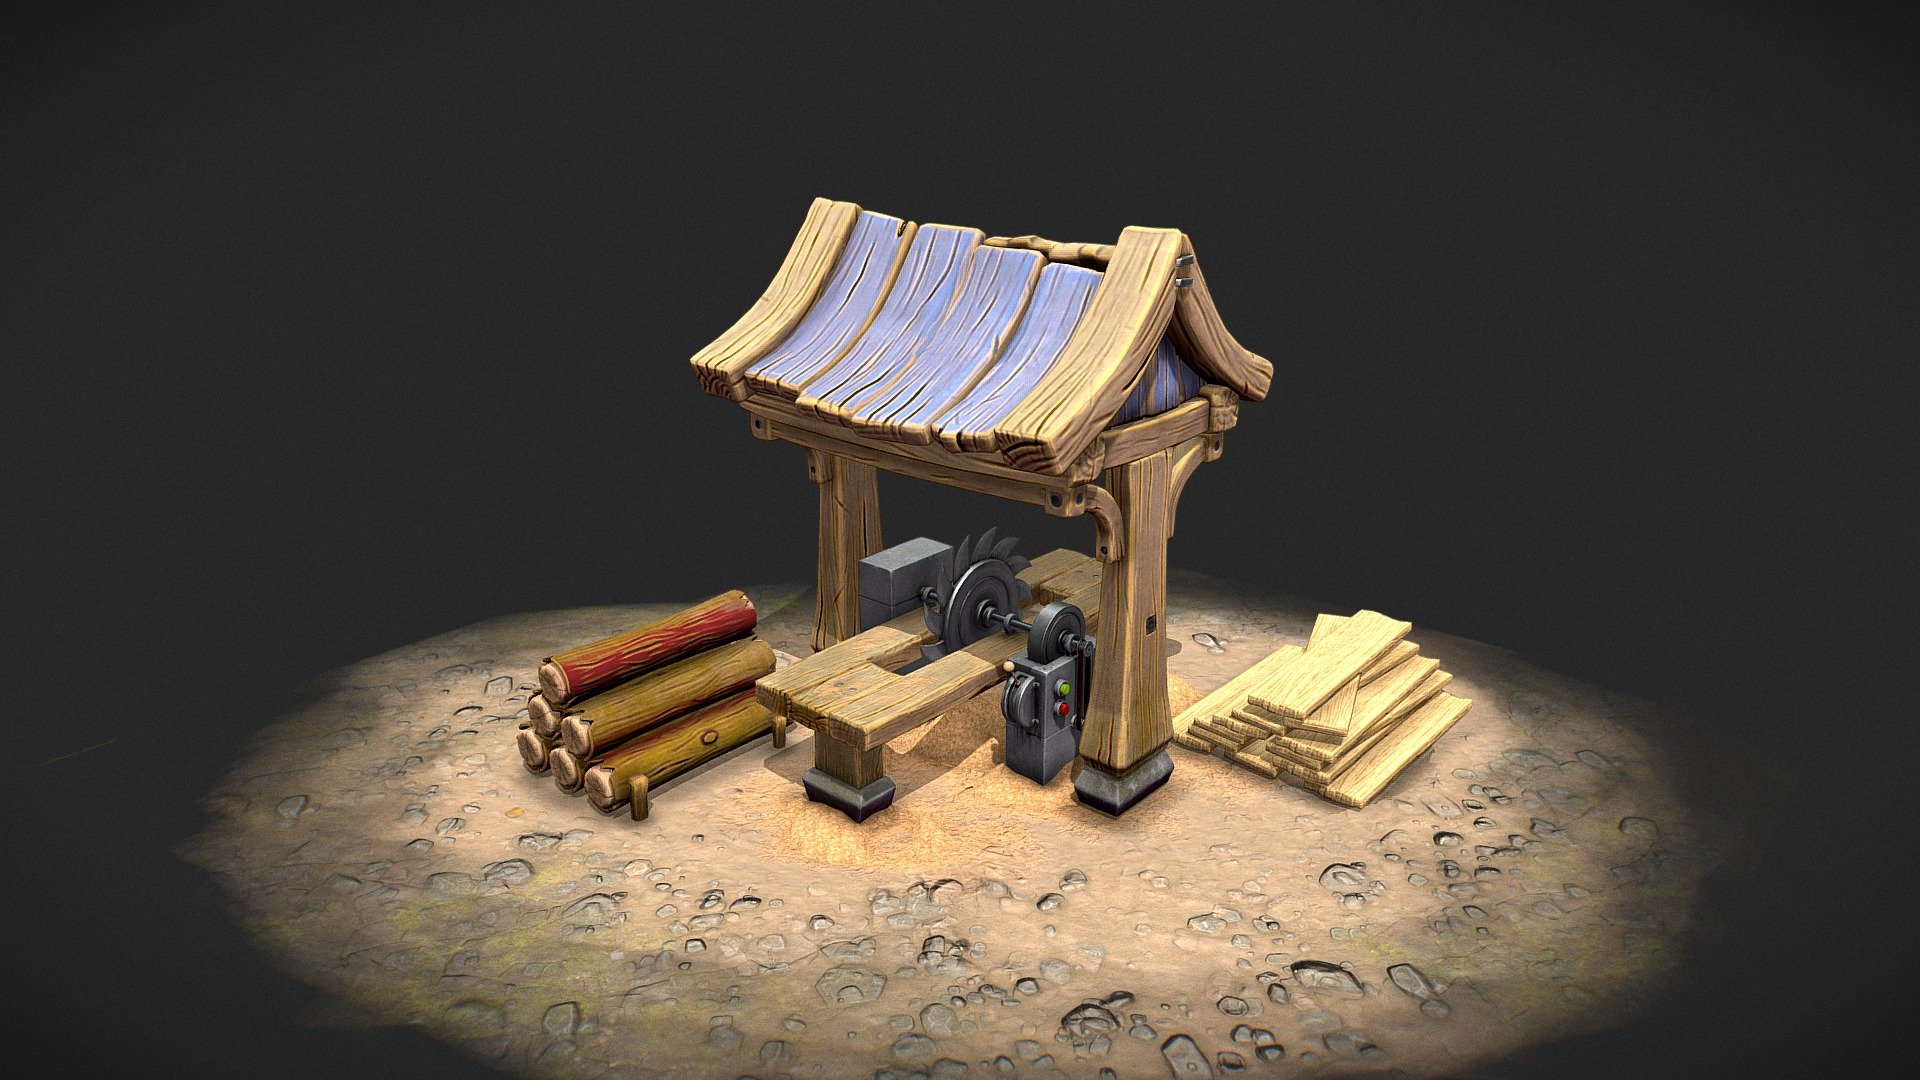 Hi there! My new model - sawmill (low poly)
I used Blender, zbrush, substance painter.

its made for my portfolio 3d model